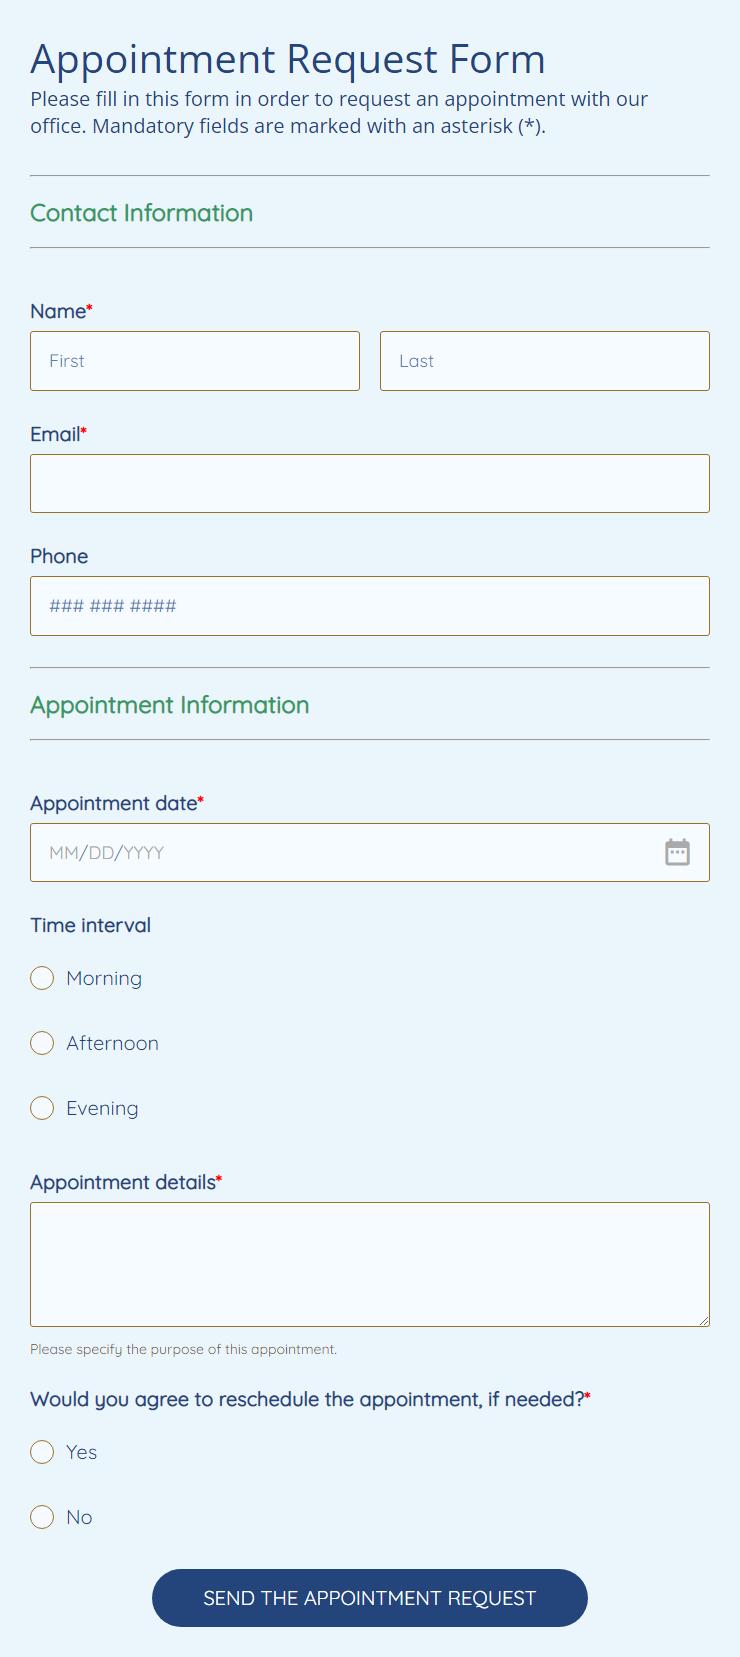 Appointment Request Form Template 123FormBuilder